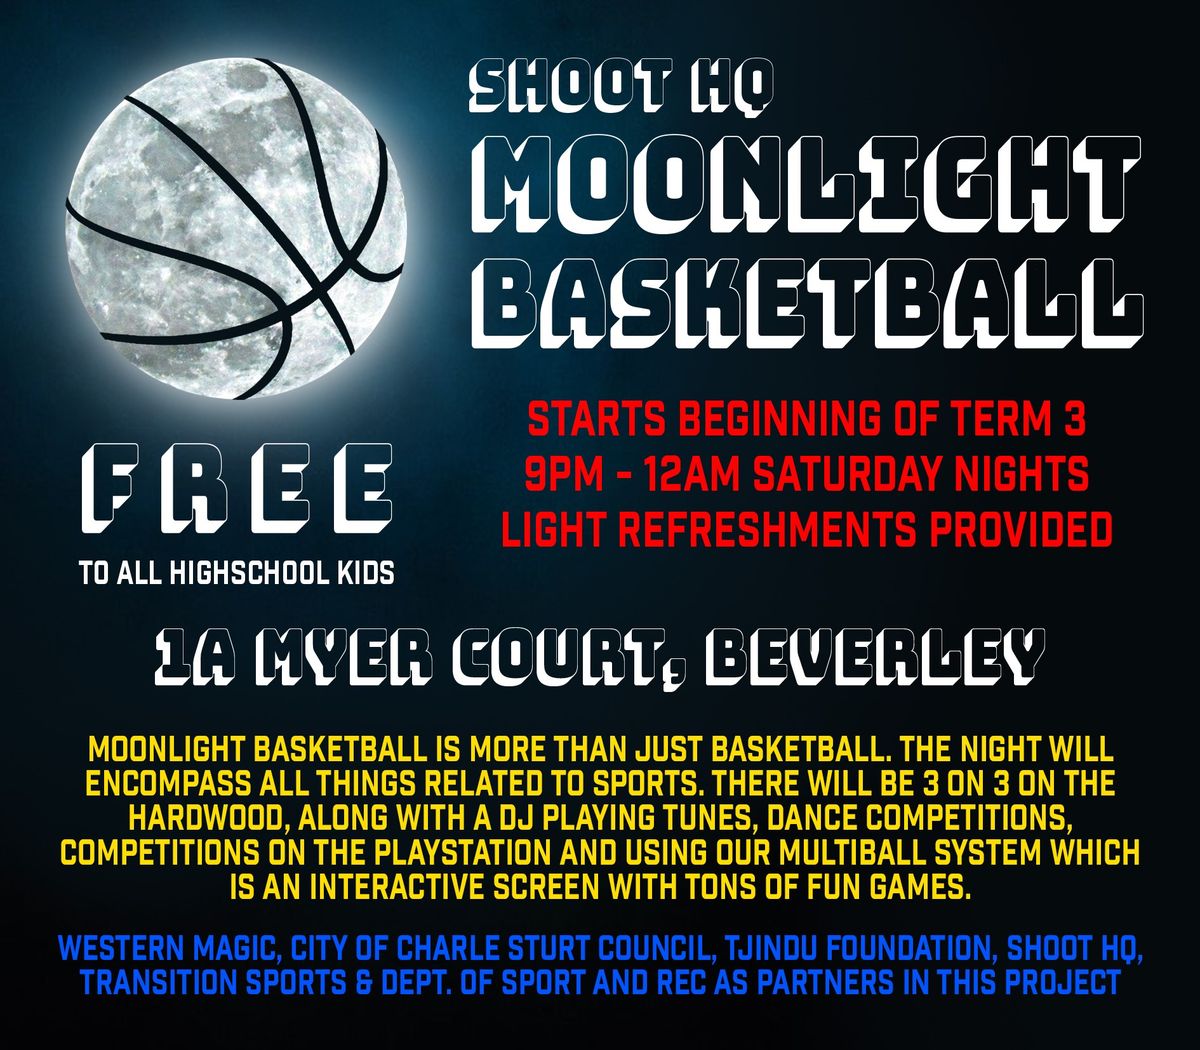 Moonlight - FREE Basketball Event on Saturdays from 9PM